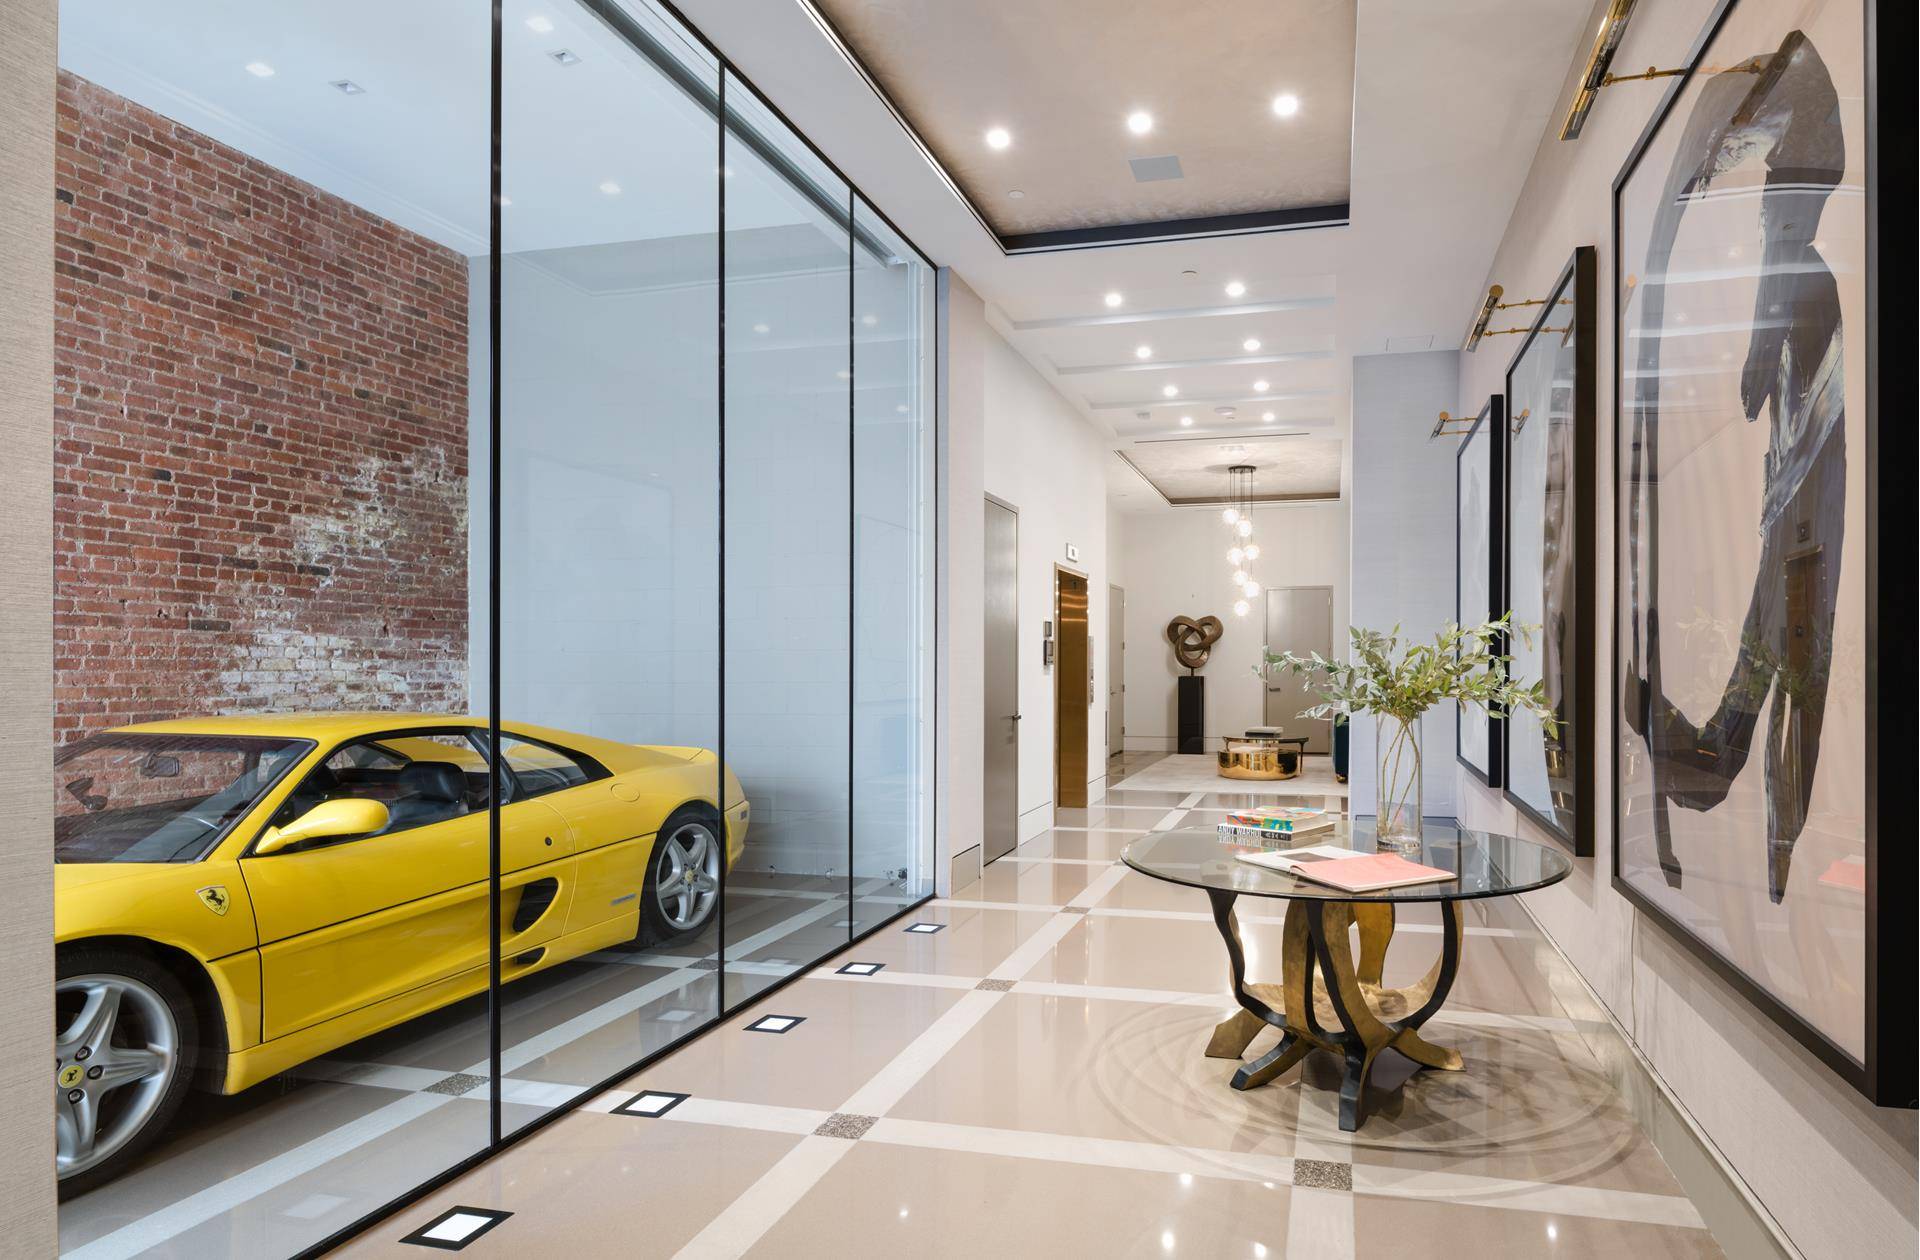 Incredibly designed and newly constructed Southern Chelsea mansion boasts approximately 11, 000 square feet of stunning renovated interiors, with a home theater, private garage, indoor resistance pool, sauna, wine cellar, ...